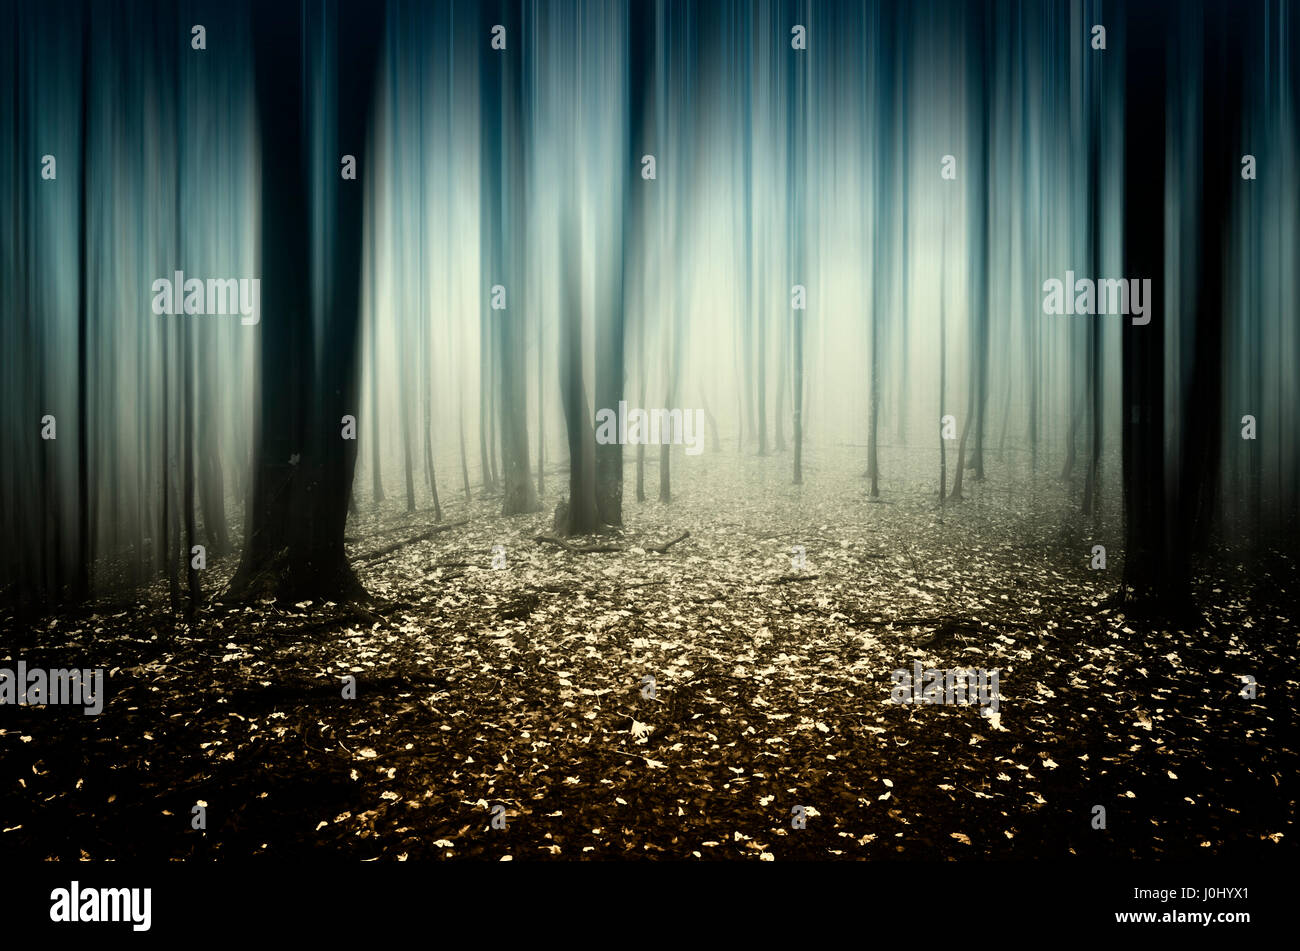 surreal fantasy forest background with motion blur Stock Photo